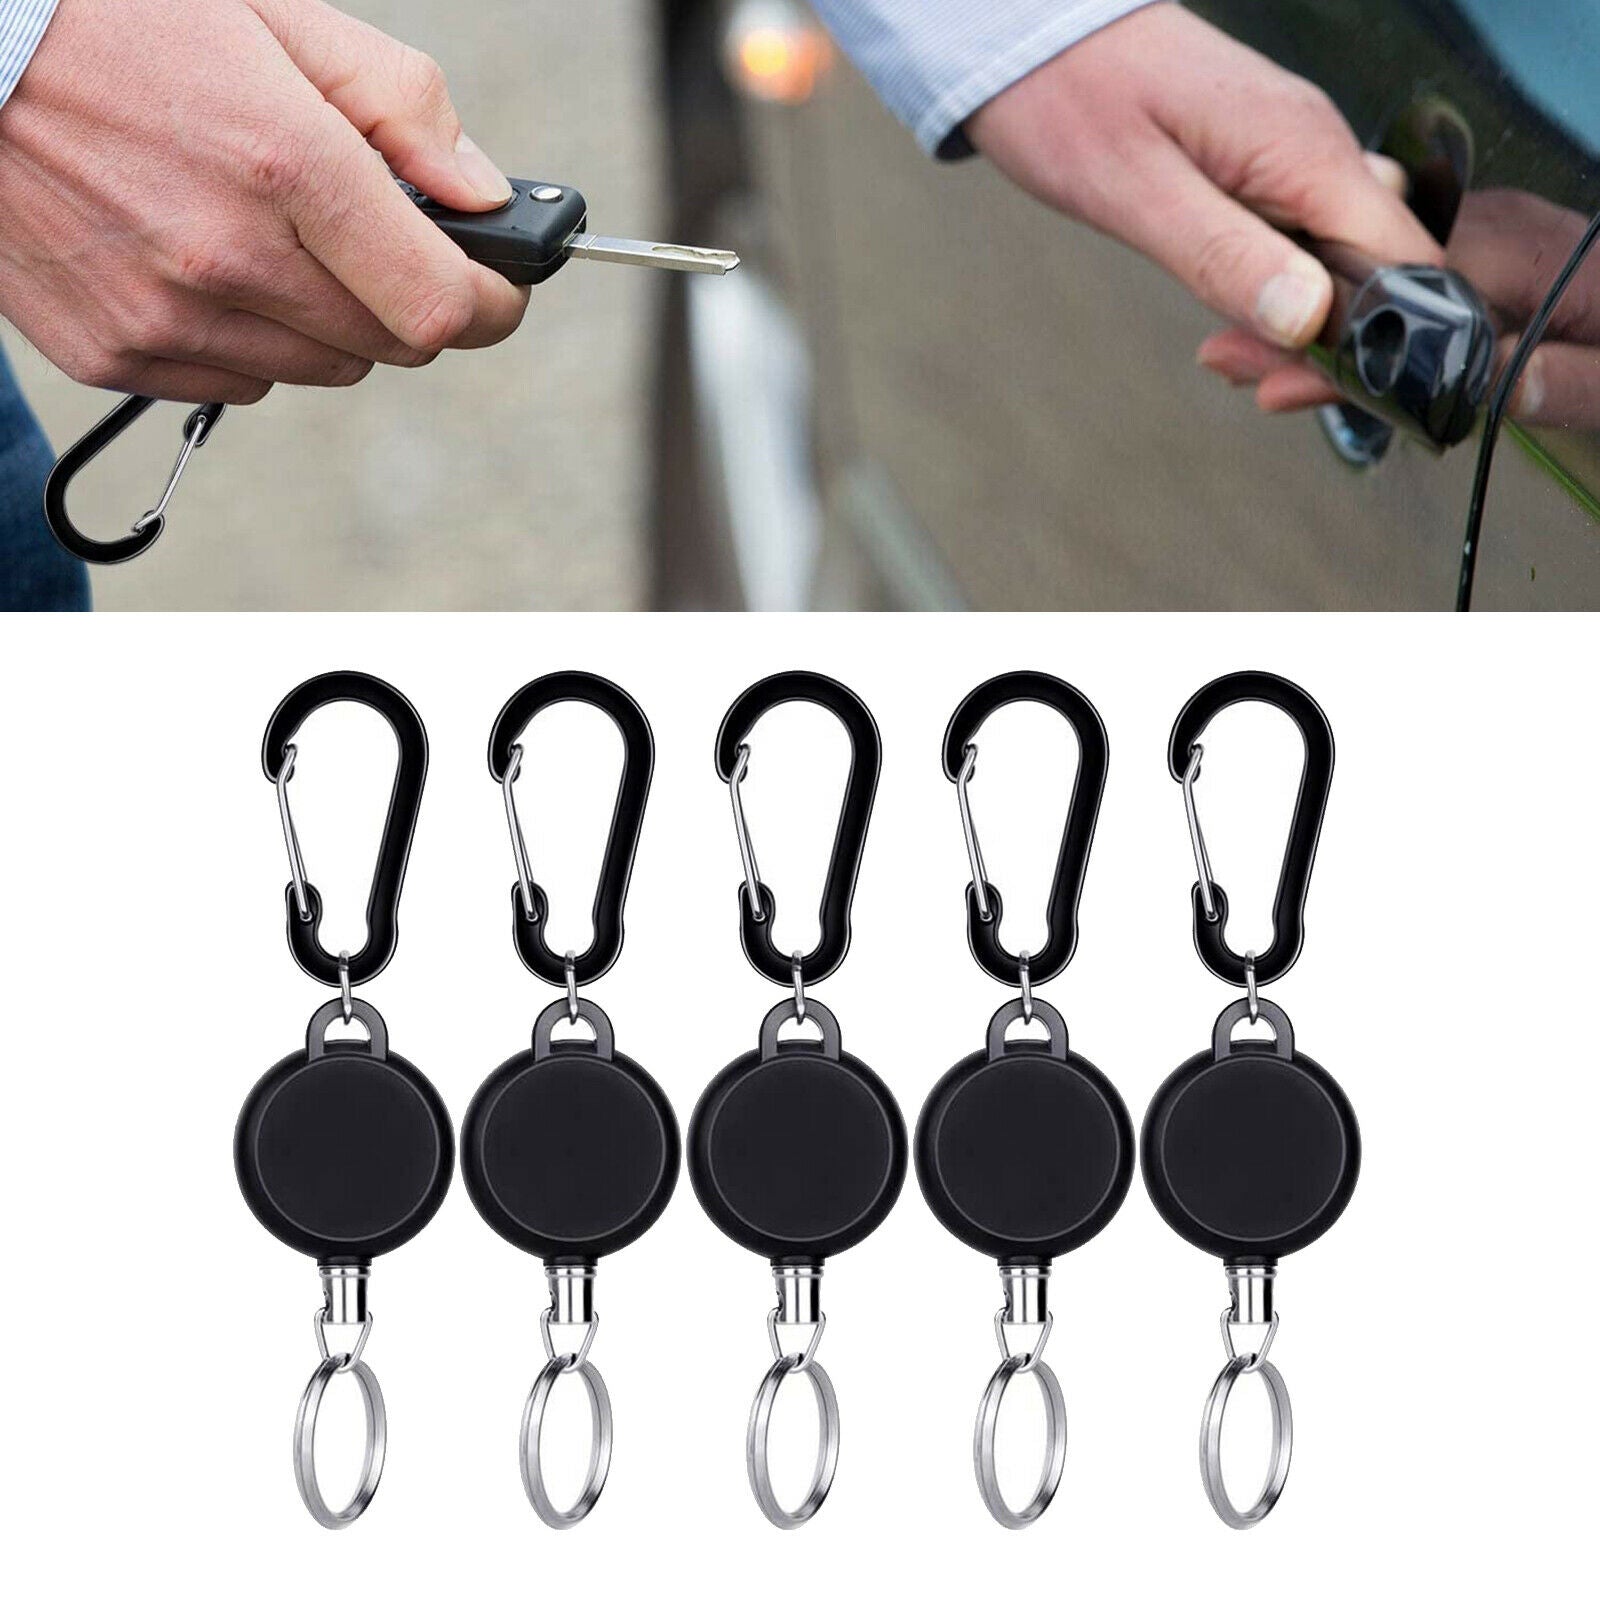 5 Pieces Retractable Key Chain Extendable Keychain Key Ring Name Cards Badge